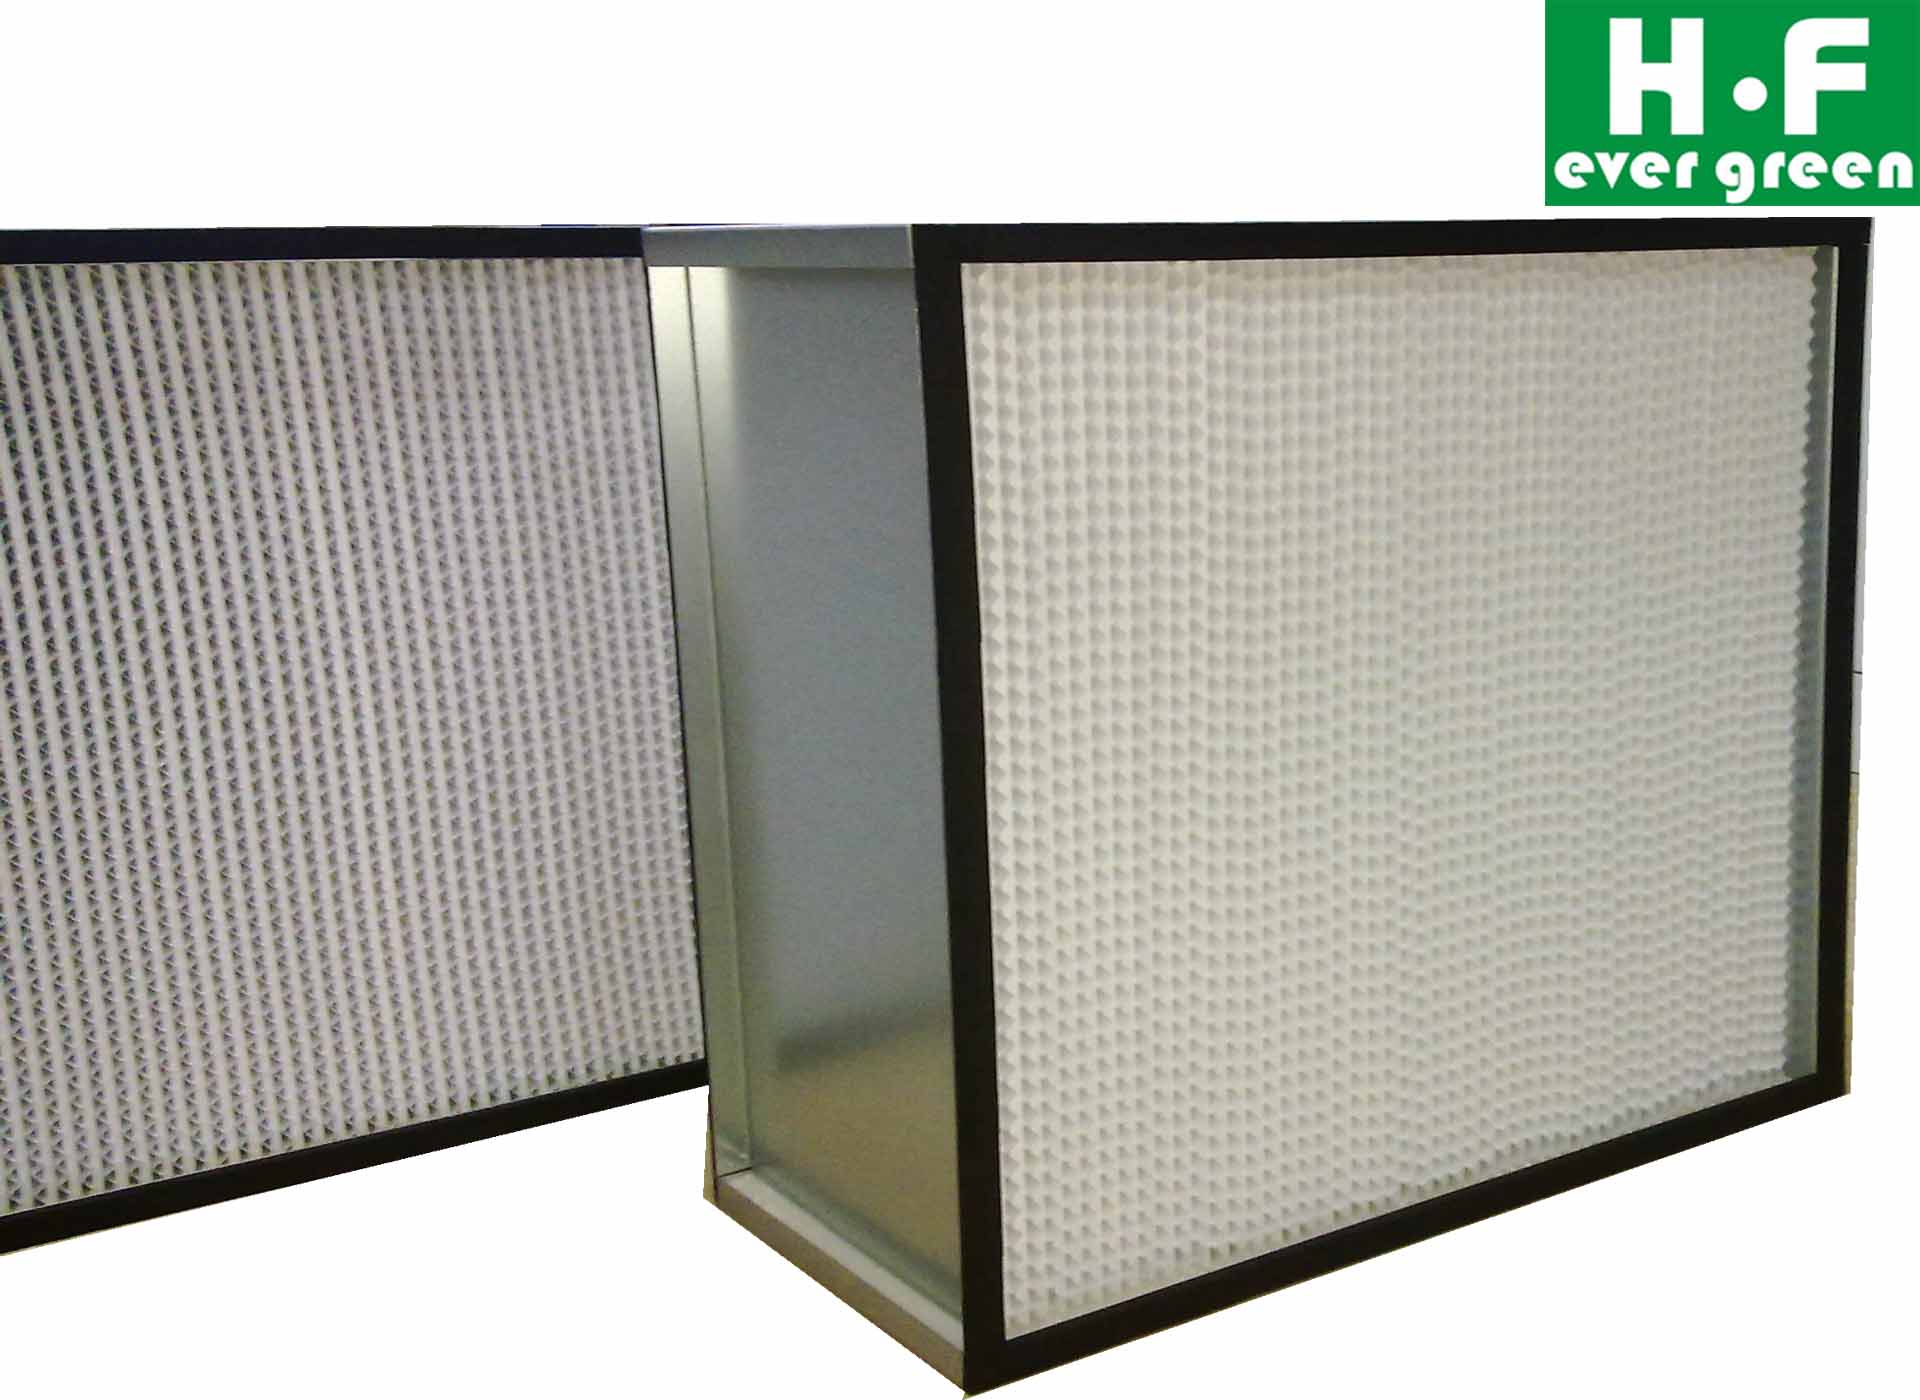 Deep pleat HEPA air filter with separator for clean room